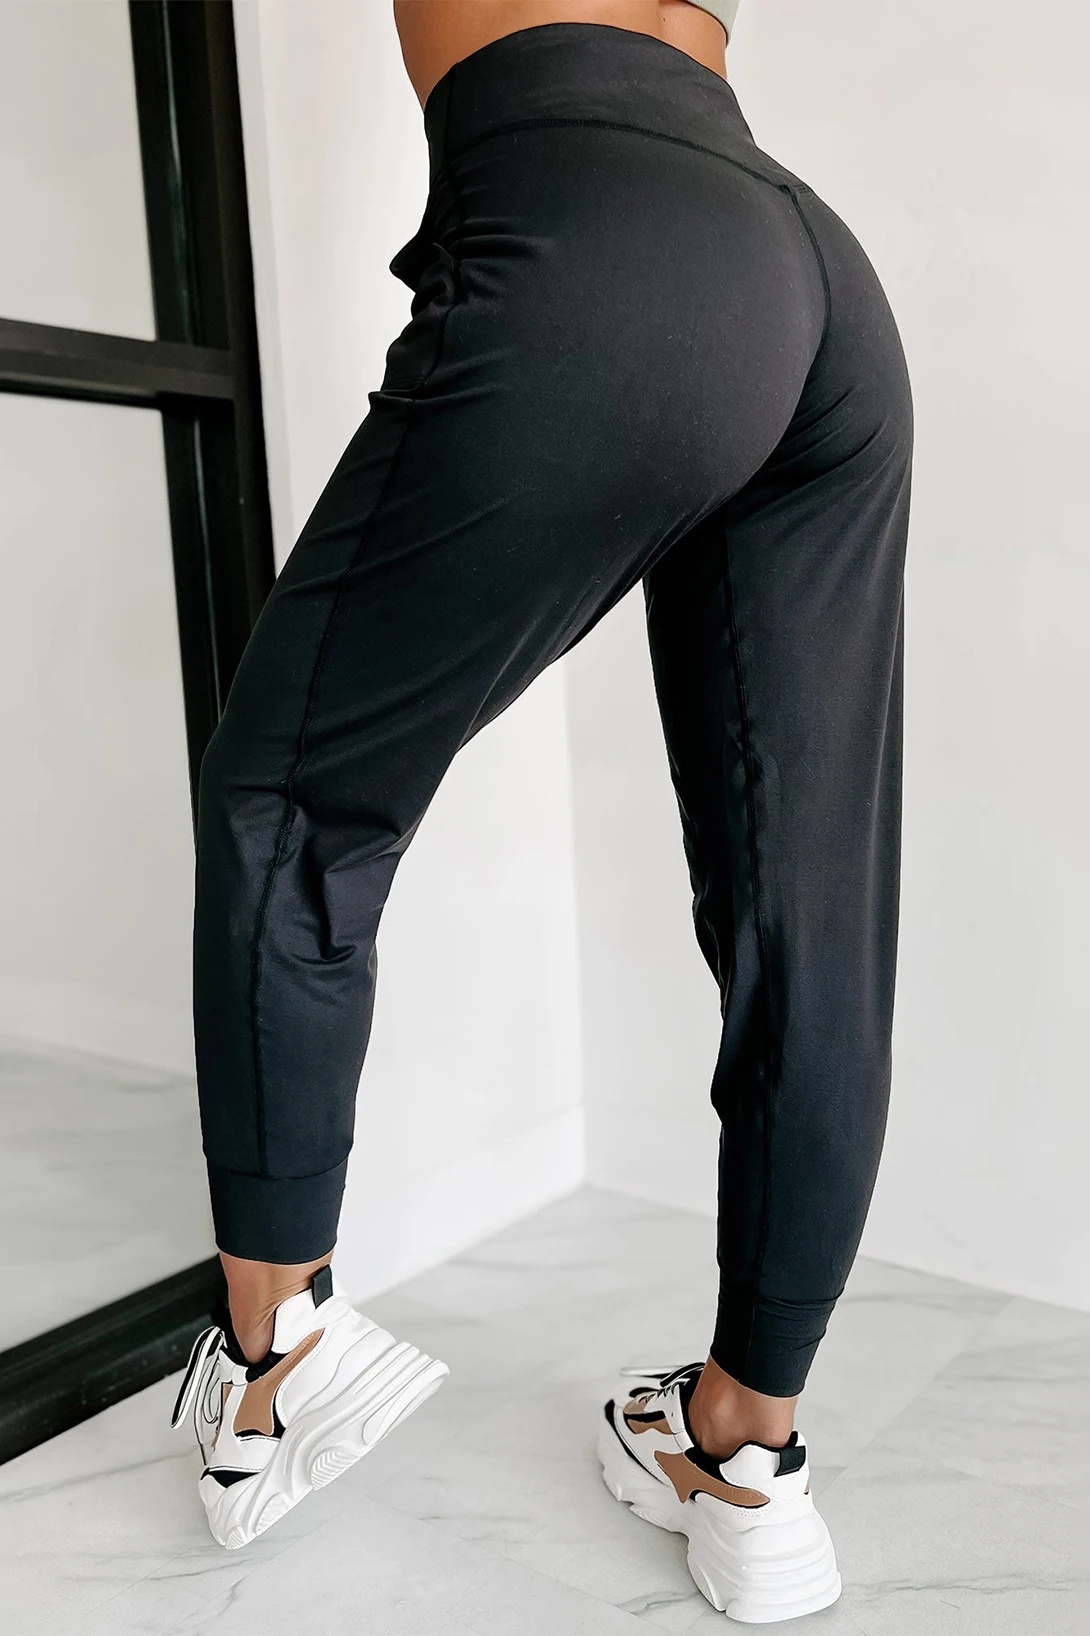 Dear-Lover Solid Exposed Seam High Waist Pocketed Joggers Workout Leggings Gym Fitness Women Yoga Pants